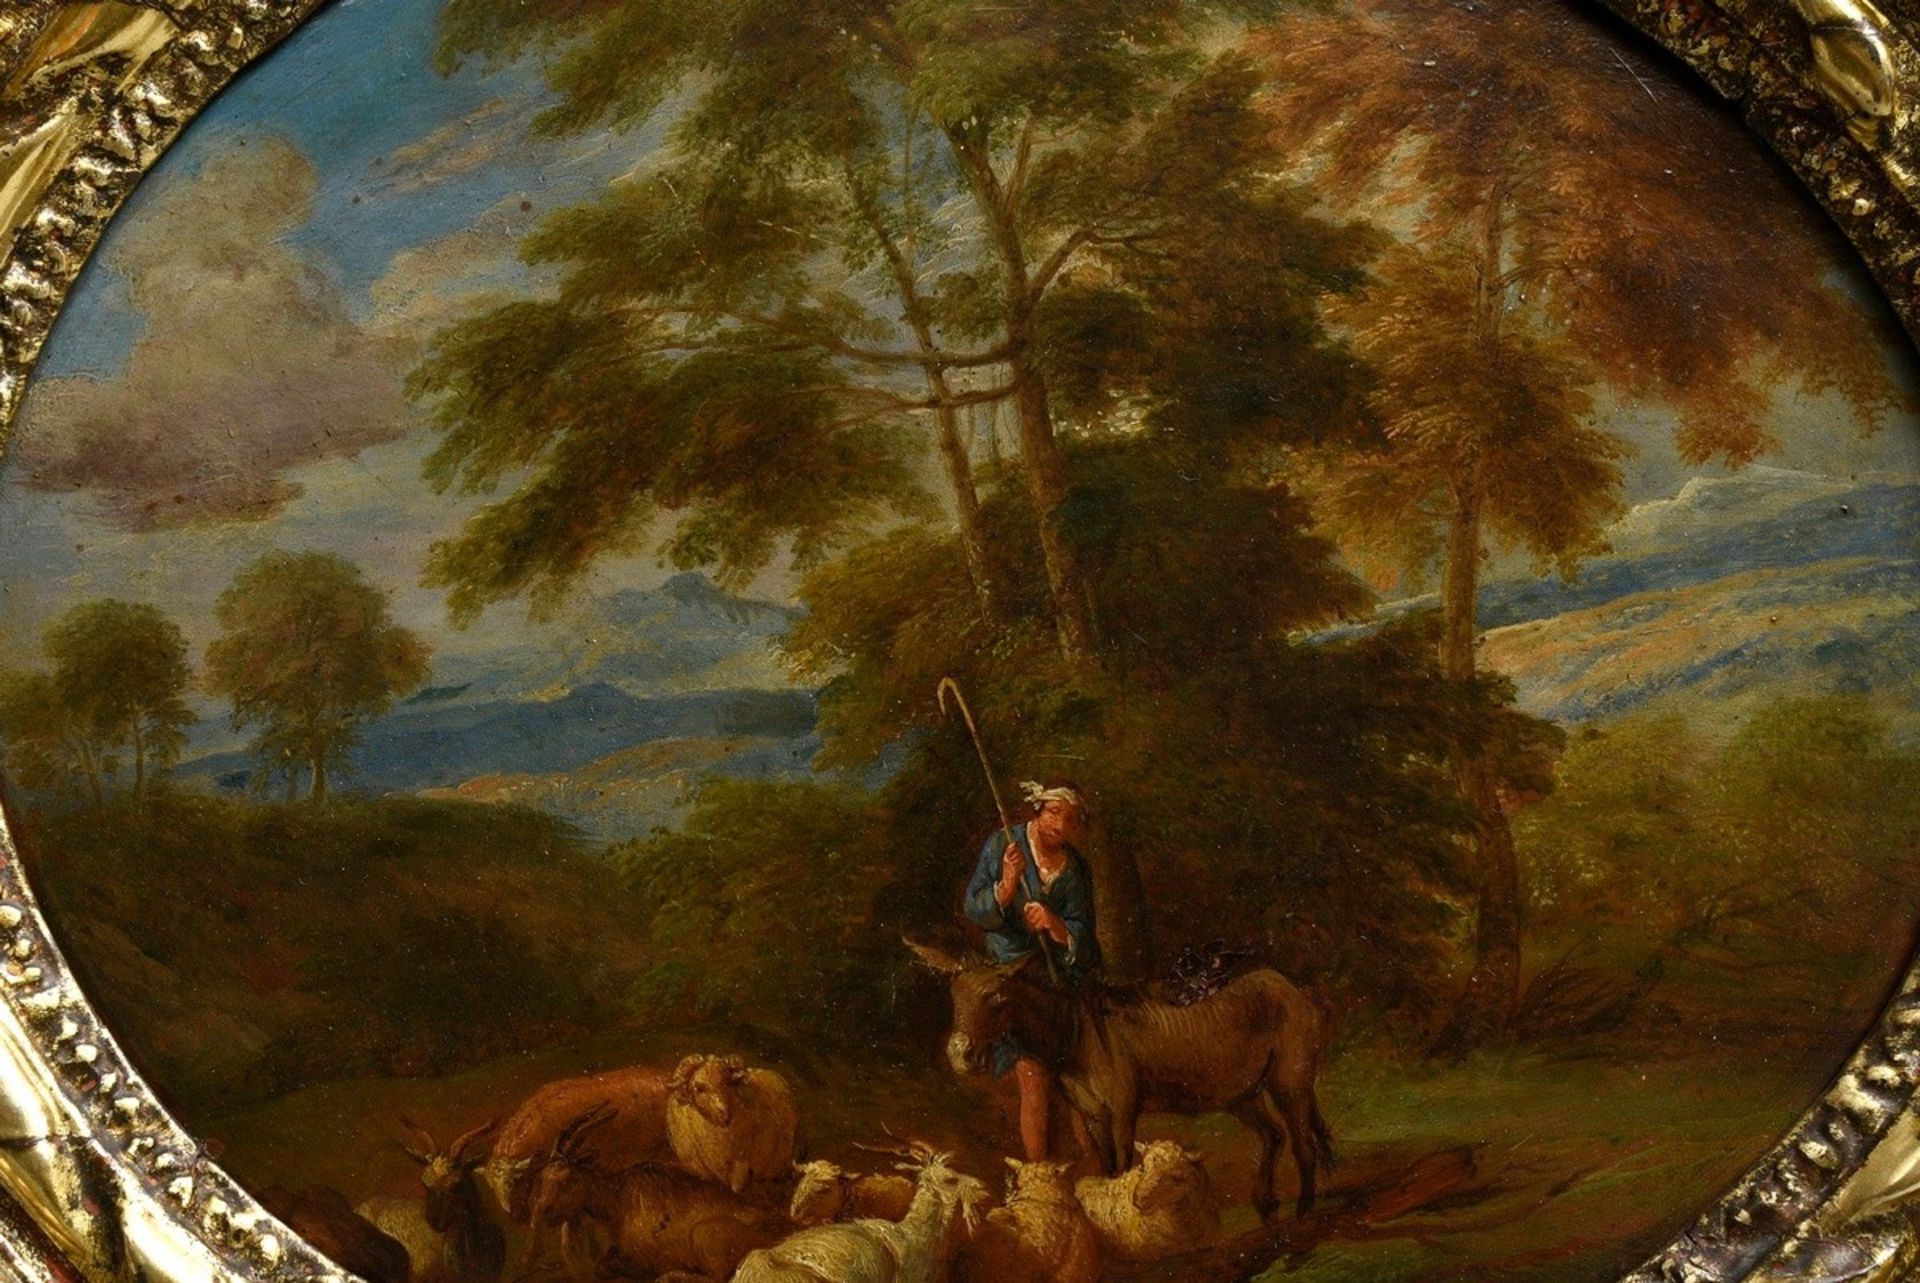 Unknown artist of the 17th/18th c. "Shepherd with flock in an Arcadian landscape", oil/copper, oval - Image 2 of 4